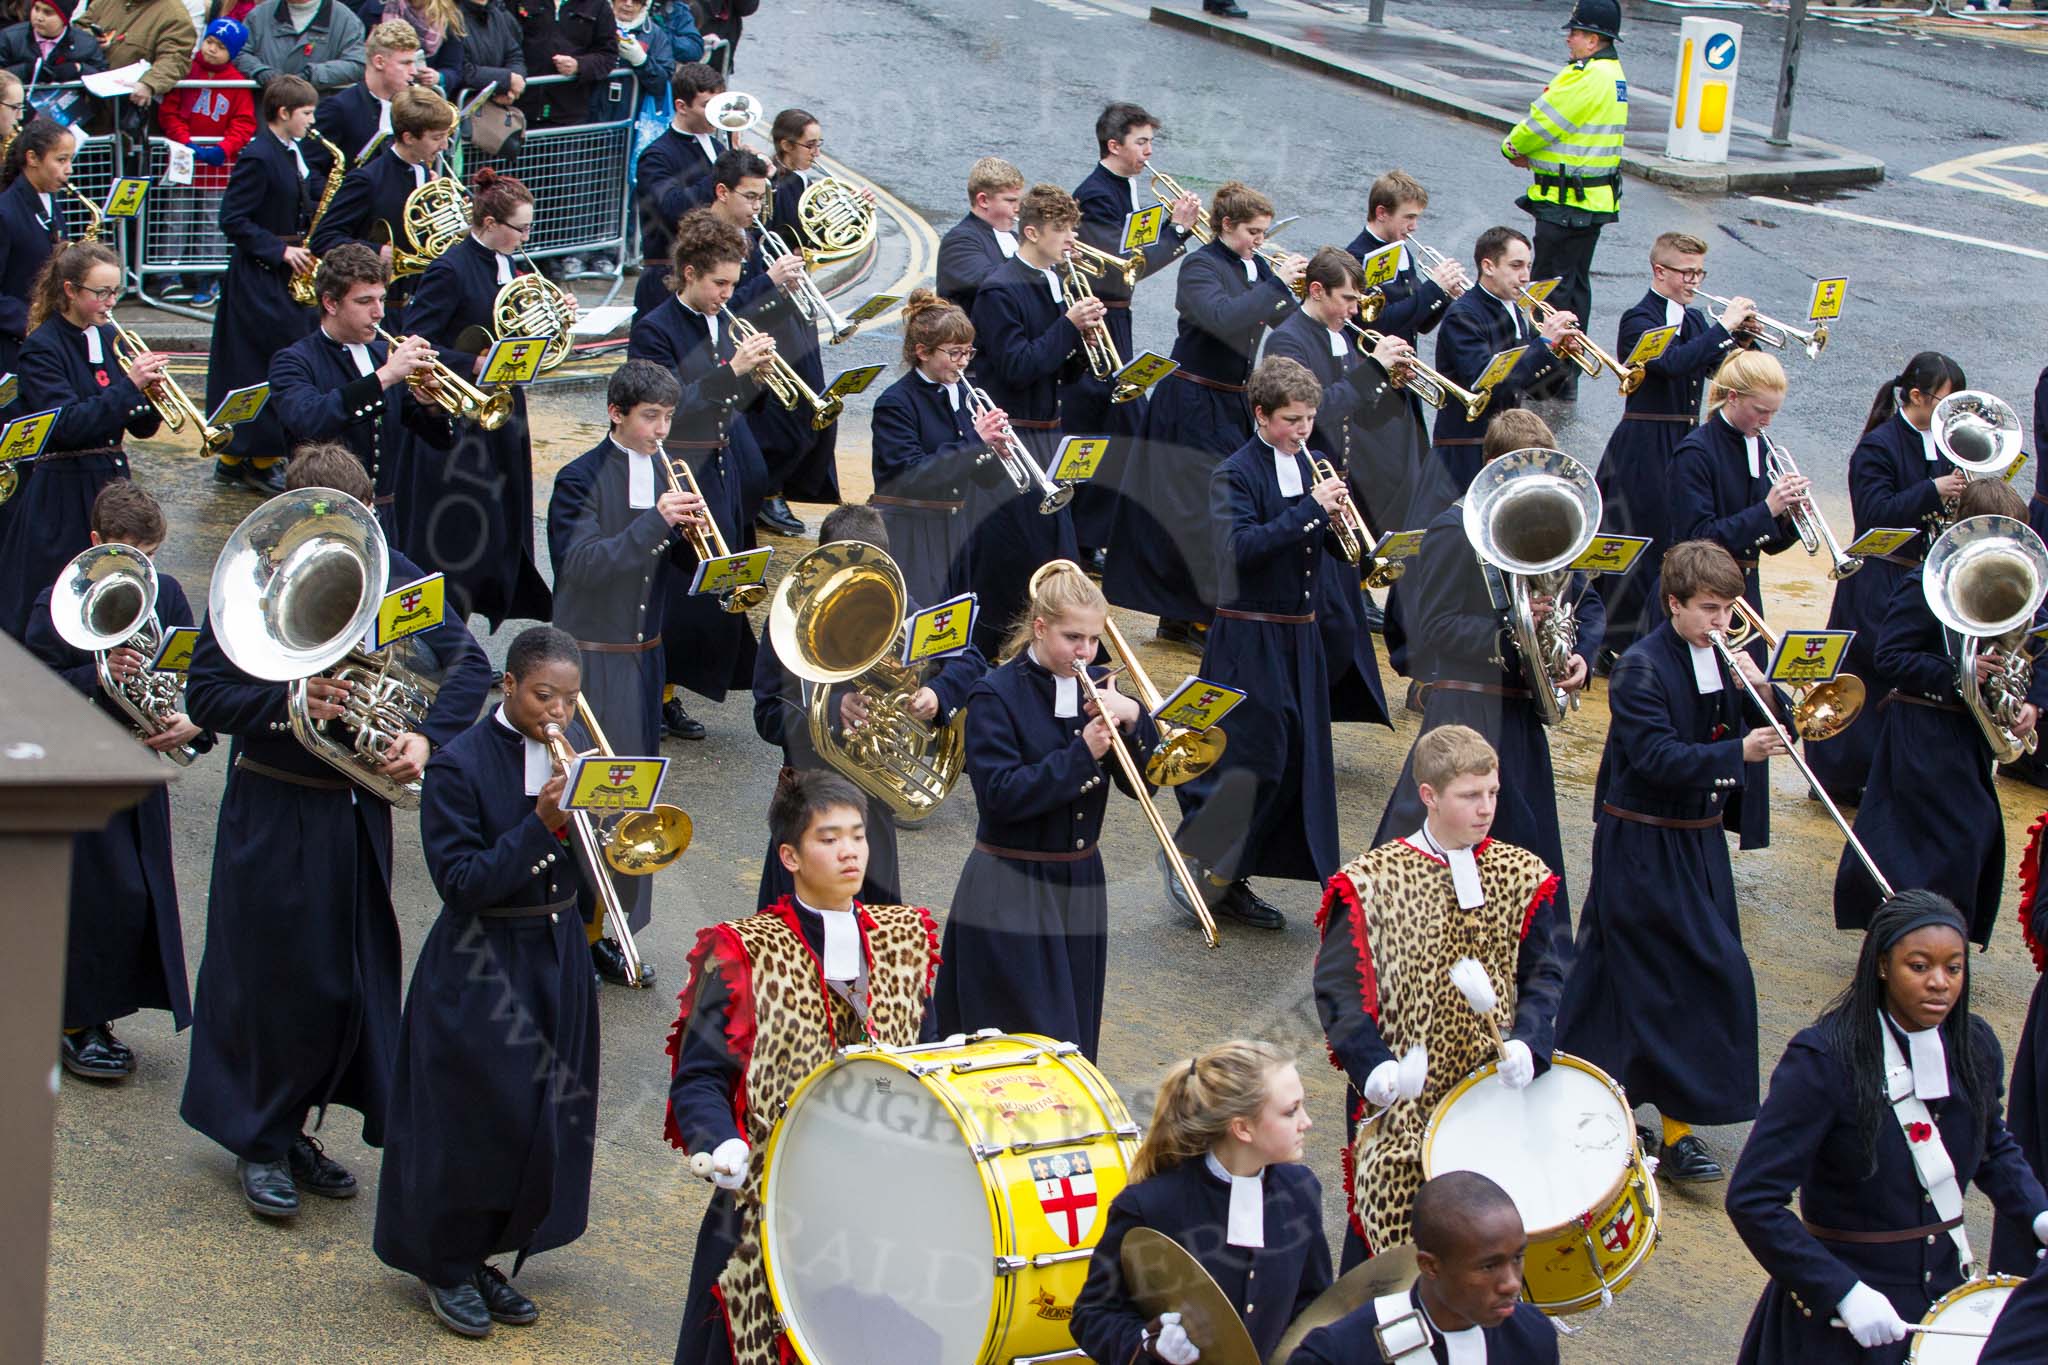 Lord Mayor's Show 2012: Entry 123 - Christ's Hospital School Band..
Press stand opposite Mansion House, City of London,
London,
Greater London,
United Kingdom,
on 10 November 2012 at 12:02, image #1766